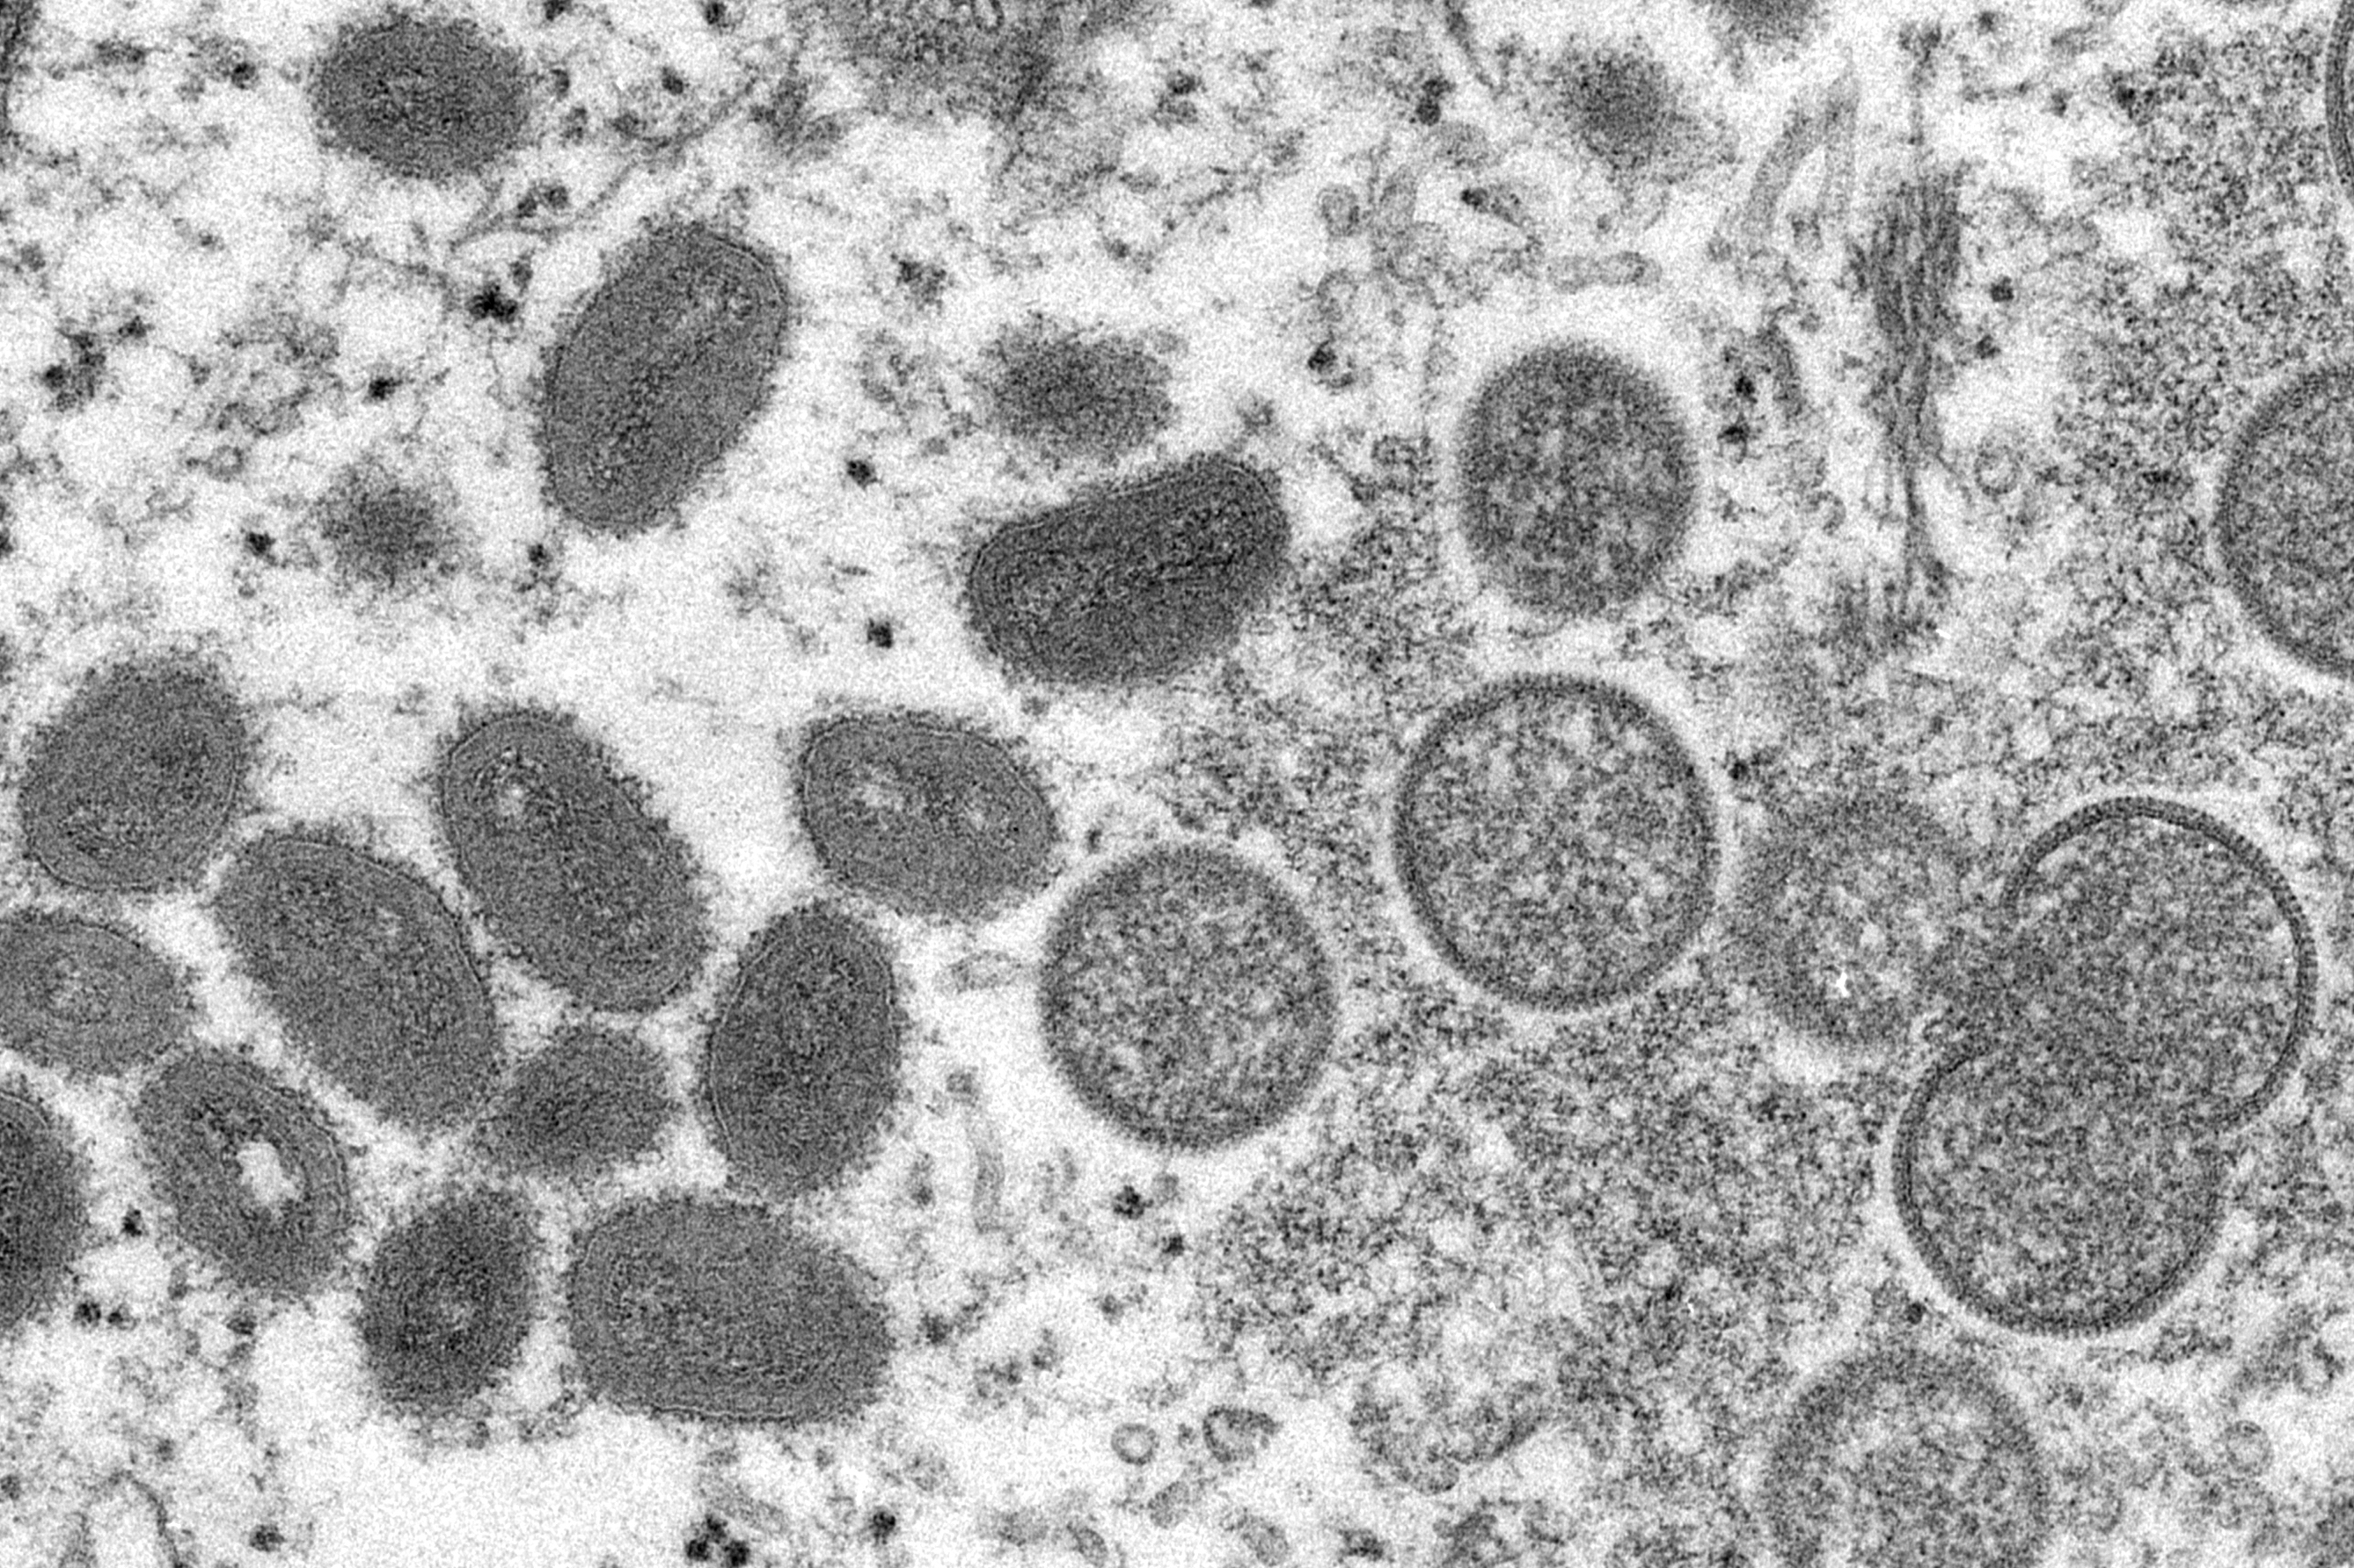 Microscope image provided by US CDC shows cells infected with monkeypox.